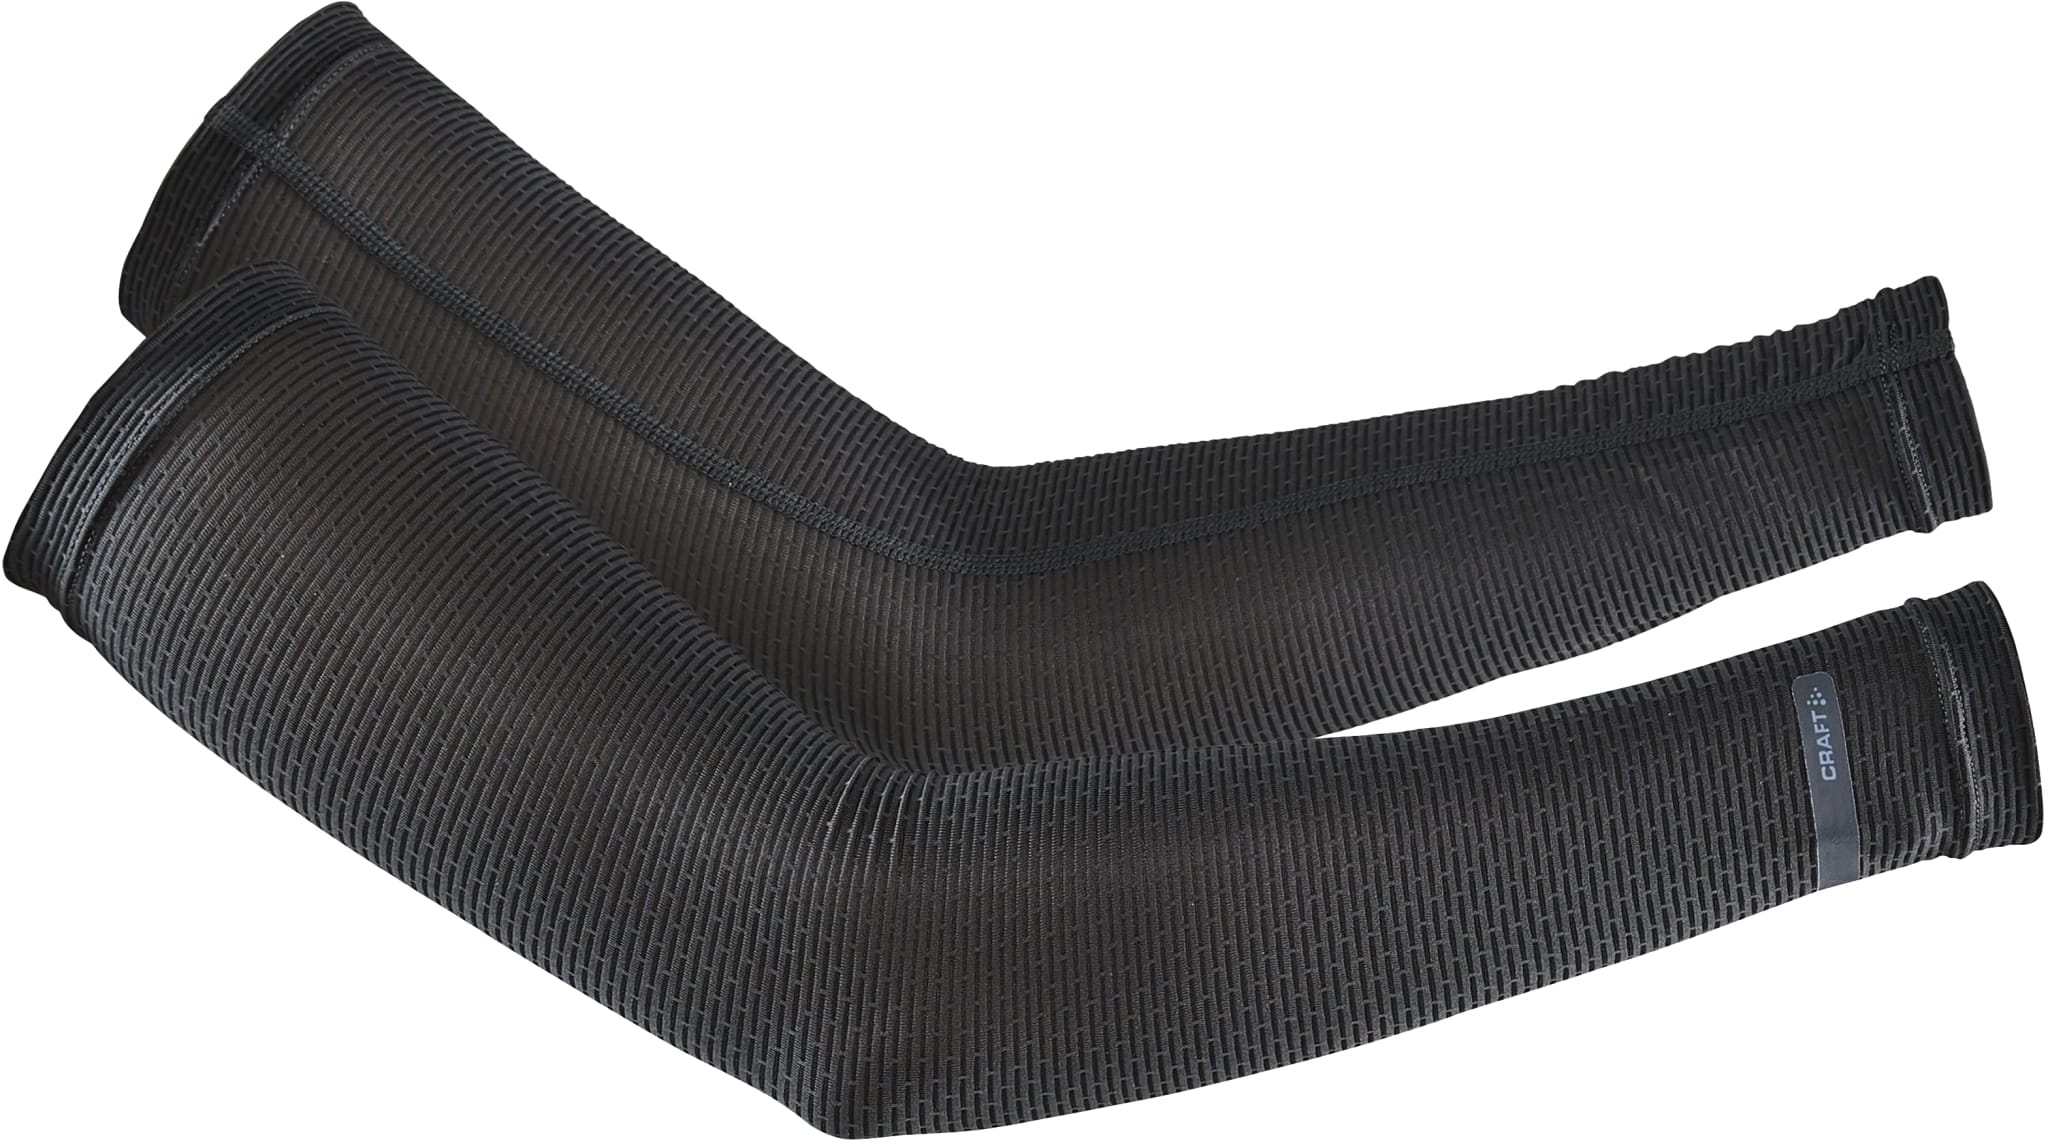 Vent Mesh Arm Cover